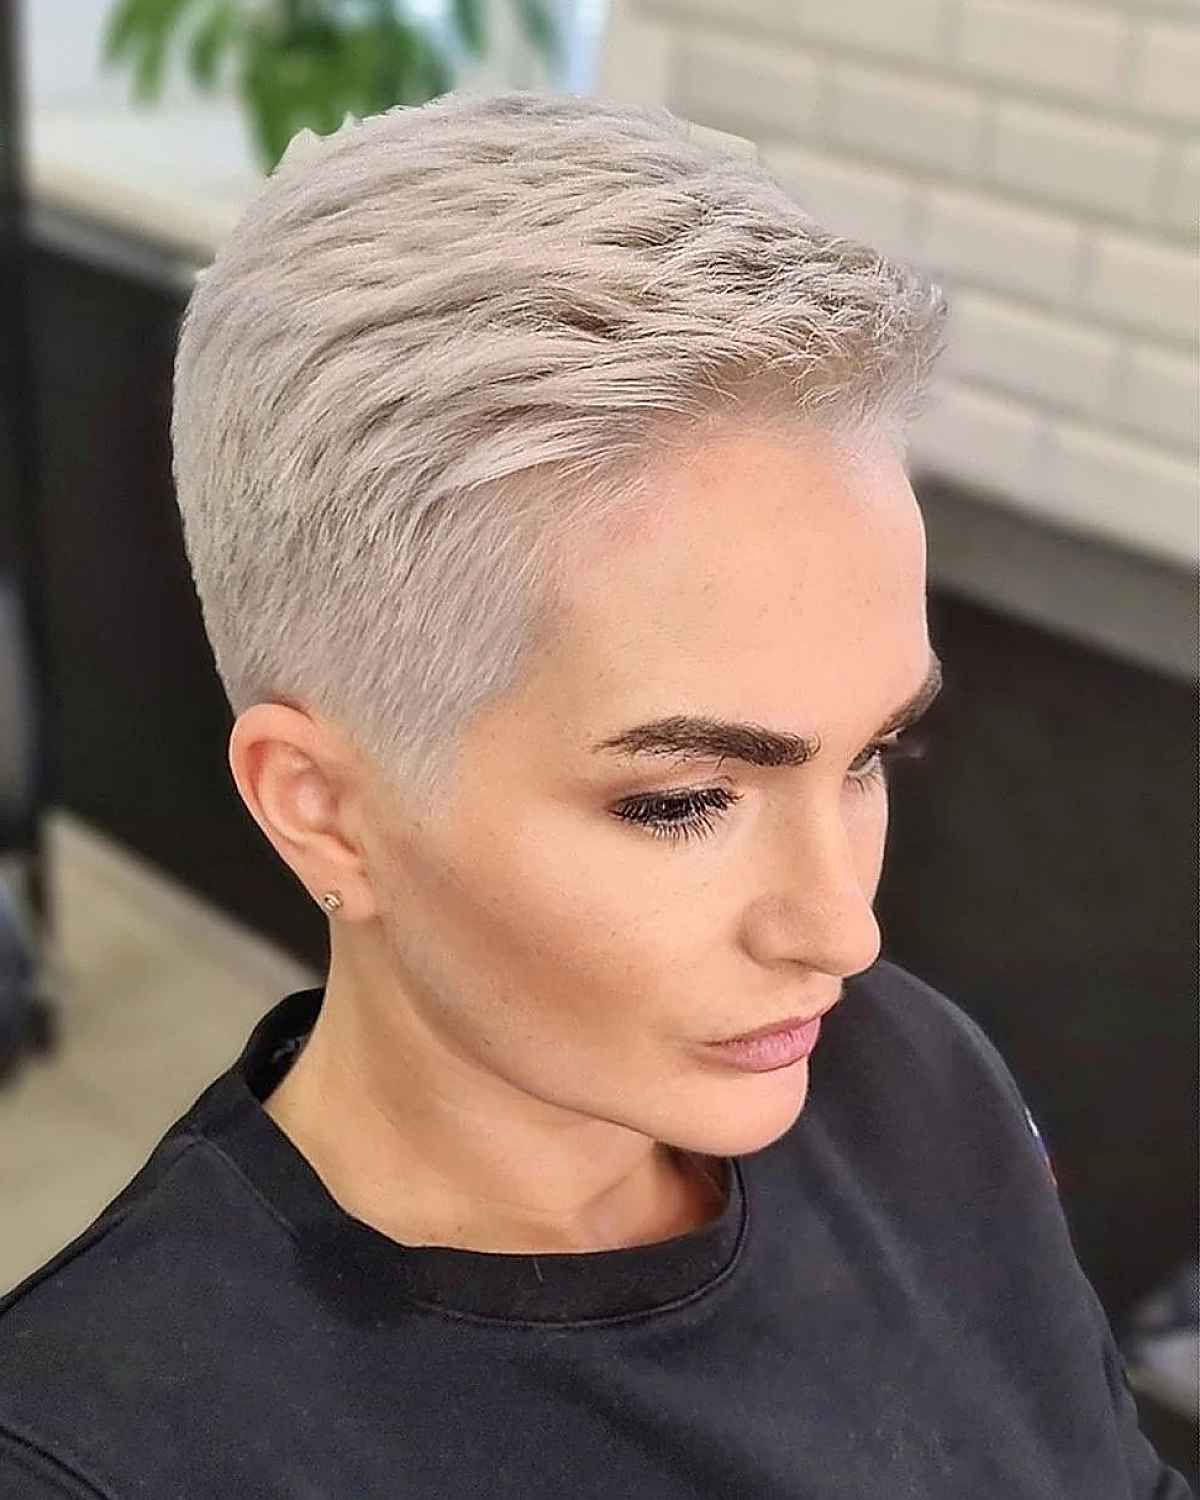 25 Very Short Haircuts For Women Trending In 2022 Inside Extra Short Women’s Hairstyles Idea (View 5 of 25)